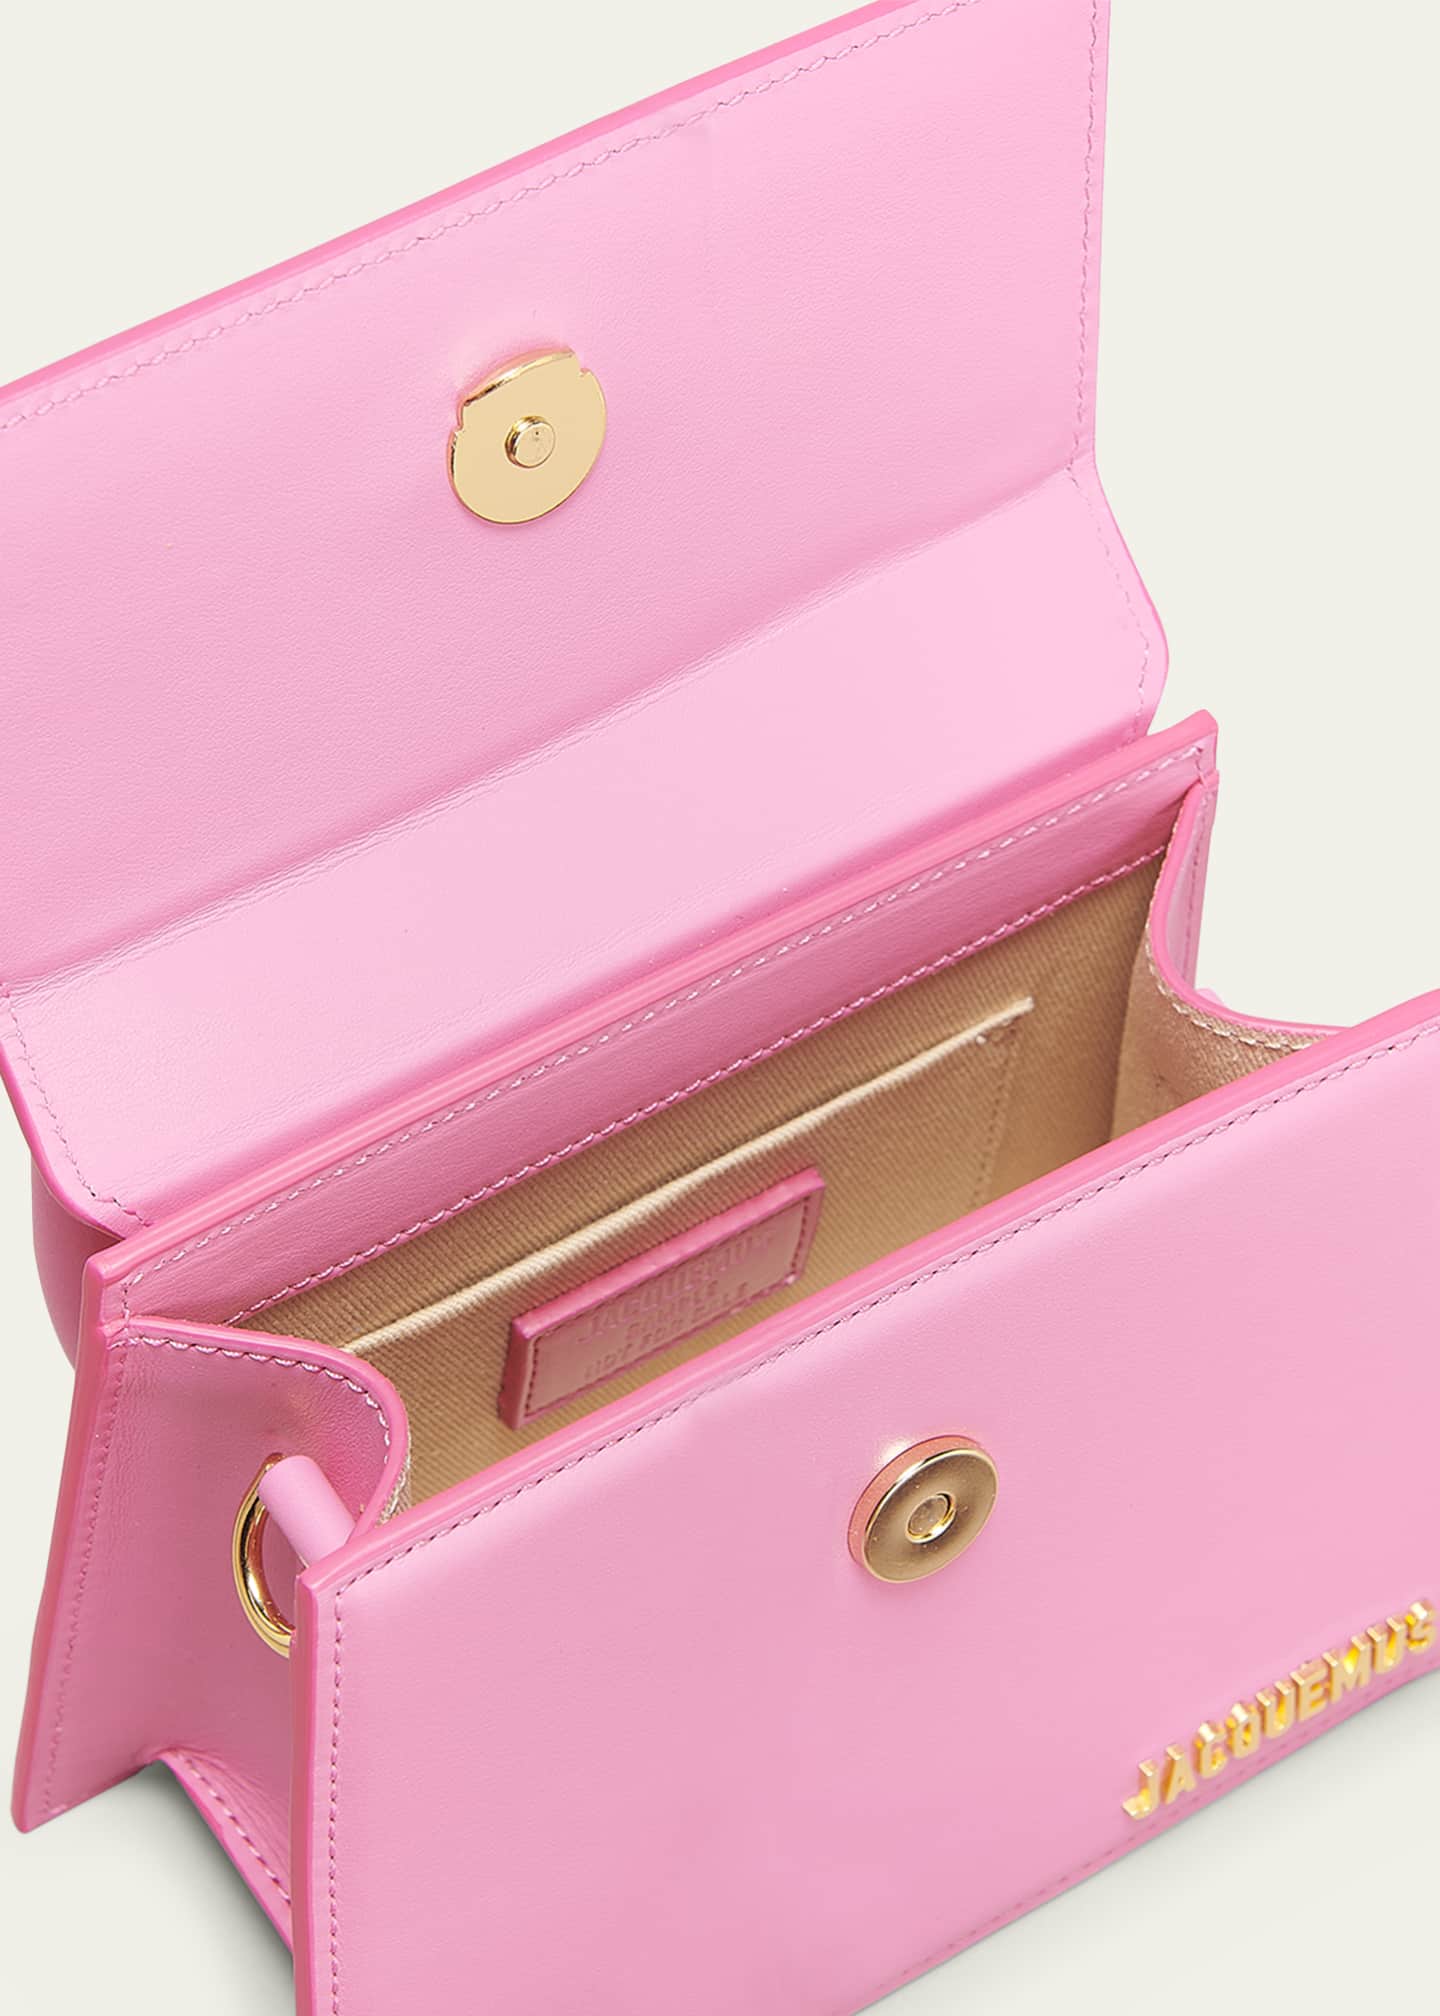 Jacquemus Neon Pink Le Chiquito Leather Top-Handle Bag